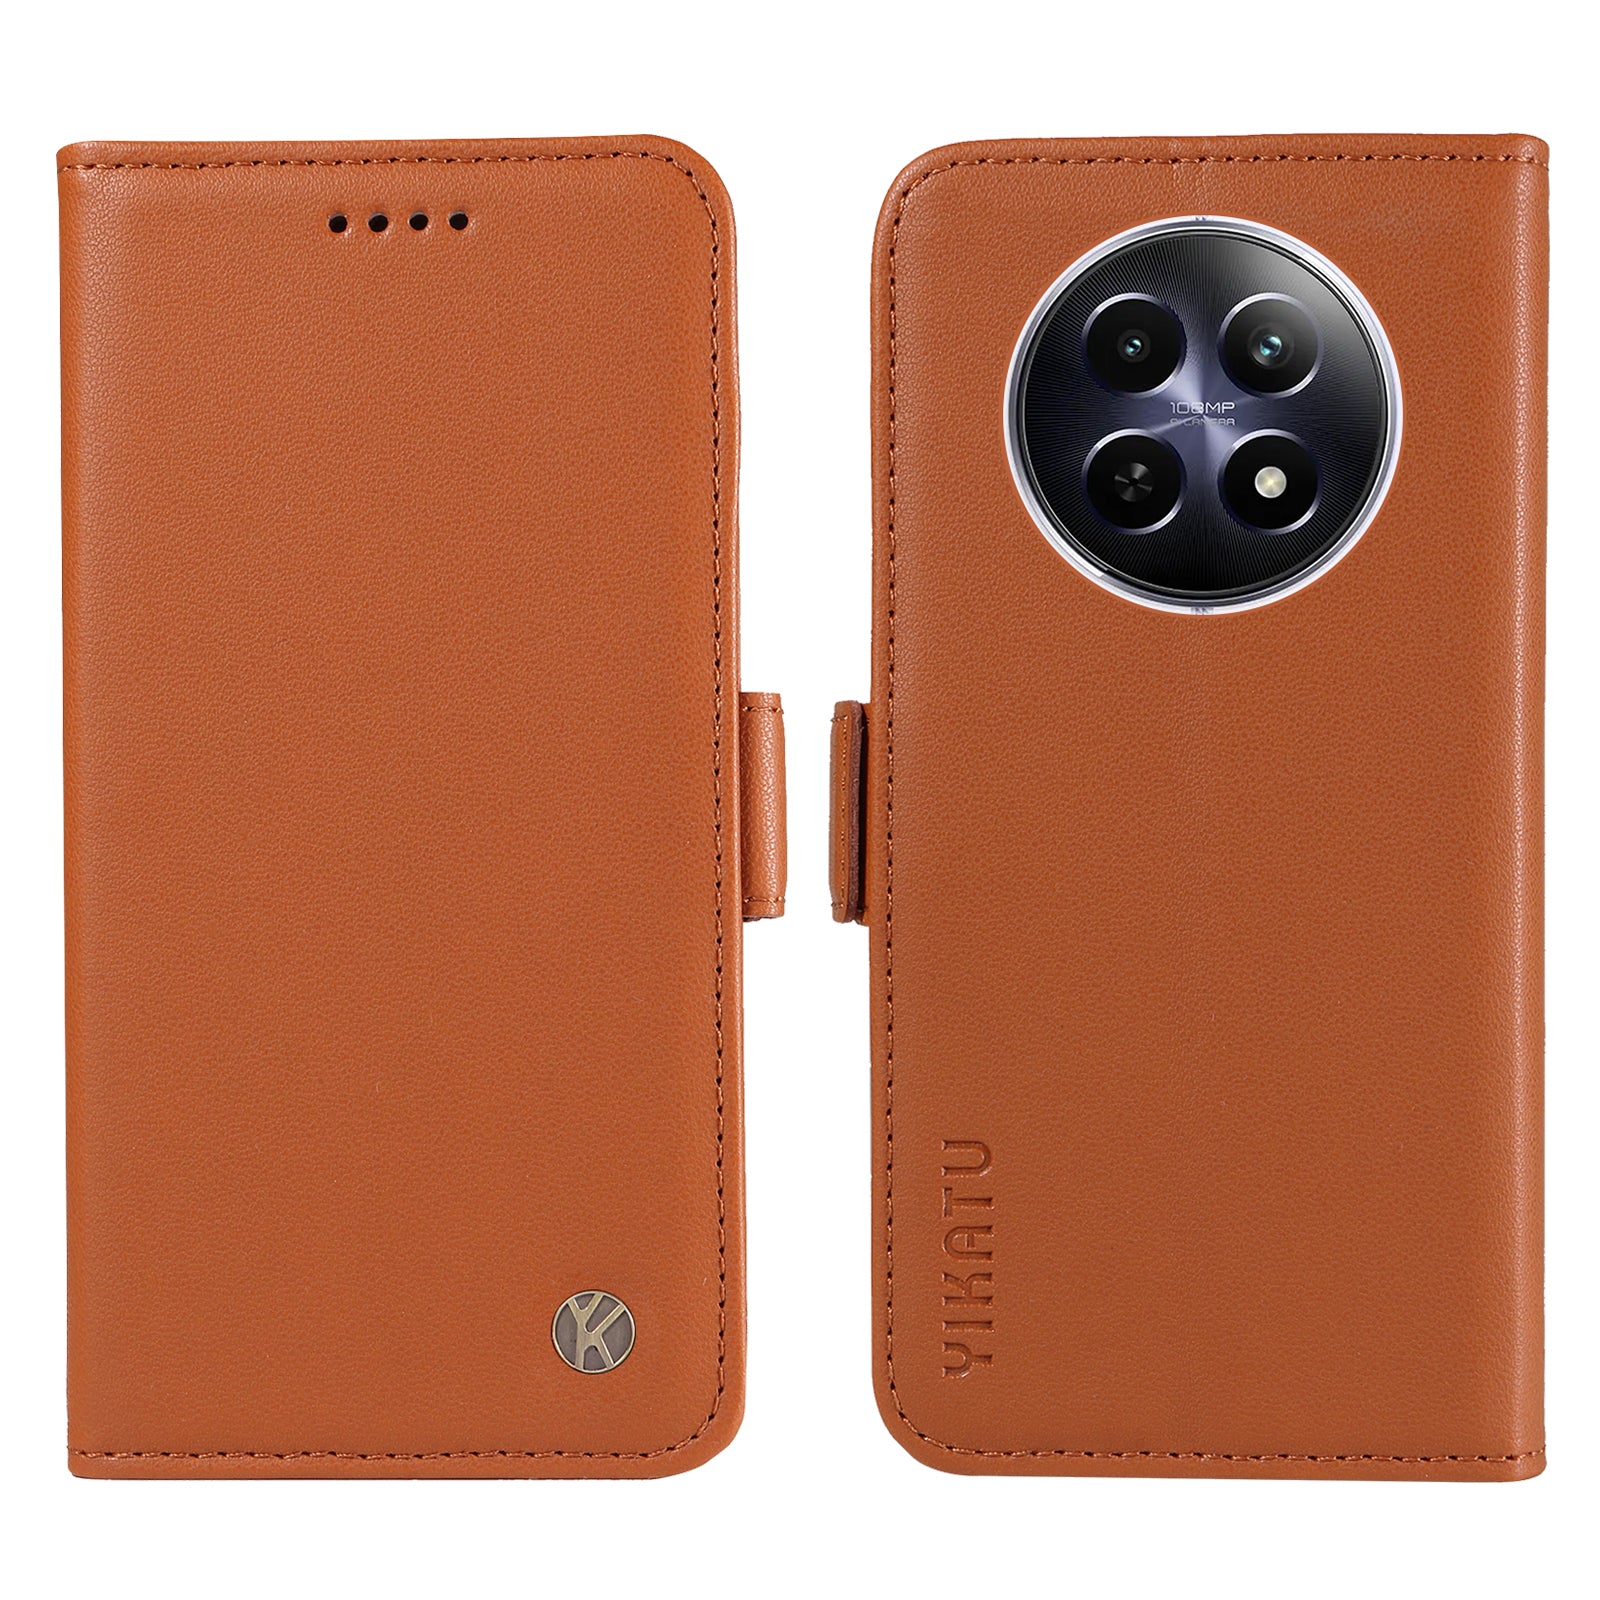 YIKATU YK-003 For Realme 12 Leather Case Wallet Cover Phone Accessories Distributors - Brown